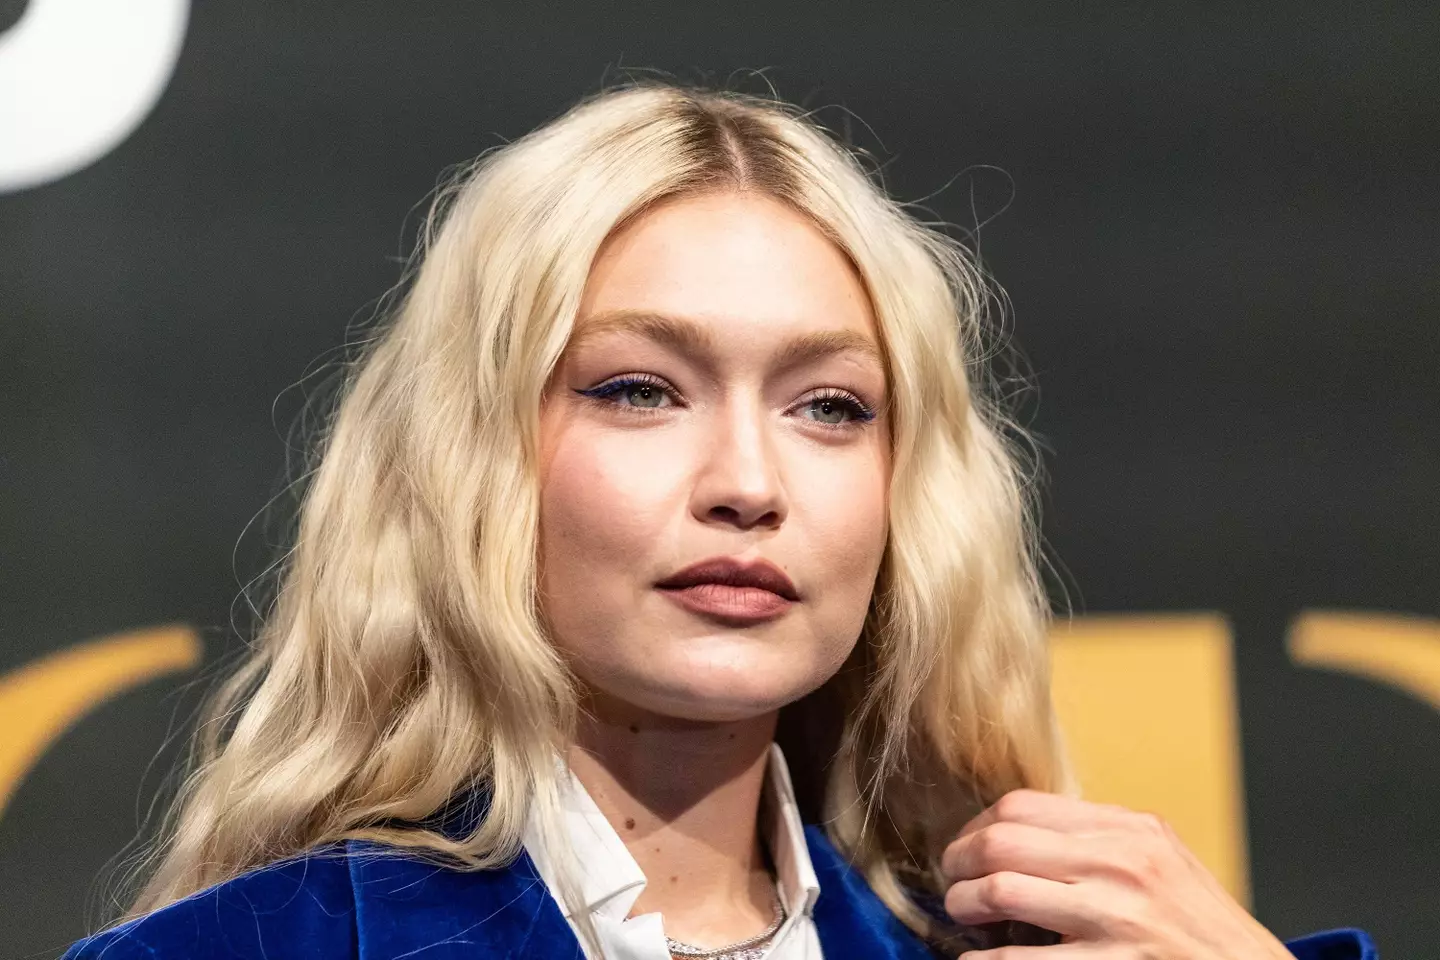 Hadid called the platform a ‘cesspool of hate & bigotry.’